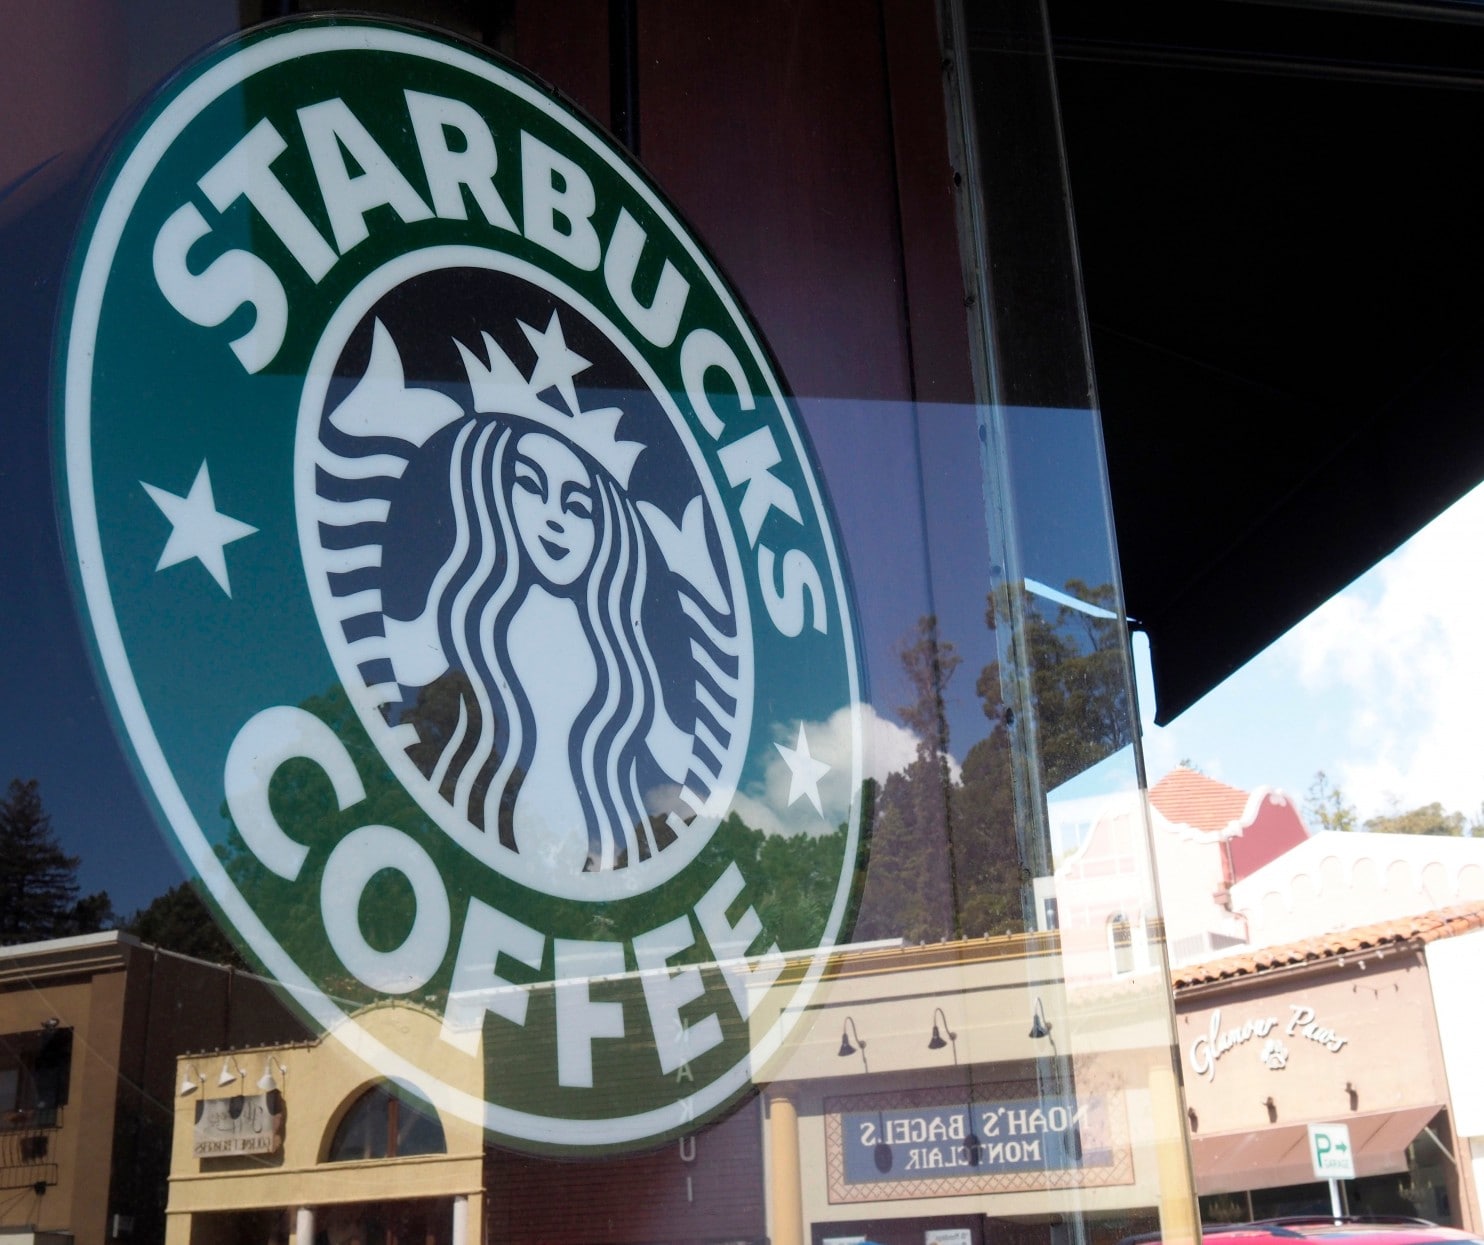 On May 29, Starbucks will close ALL stores nationwide & overseas for racial bias education - treat everyone fairly and equally no matter of their skin color.